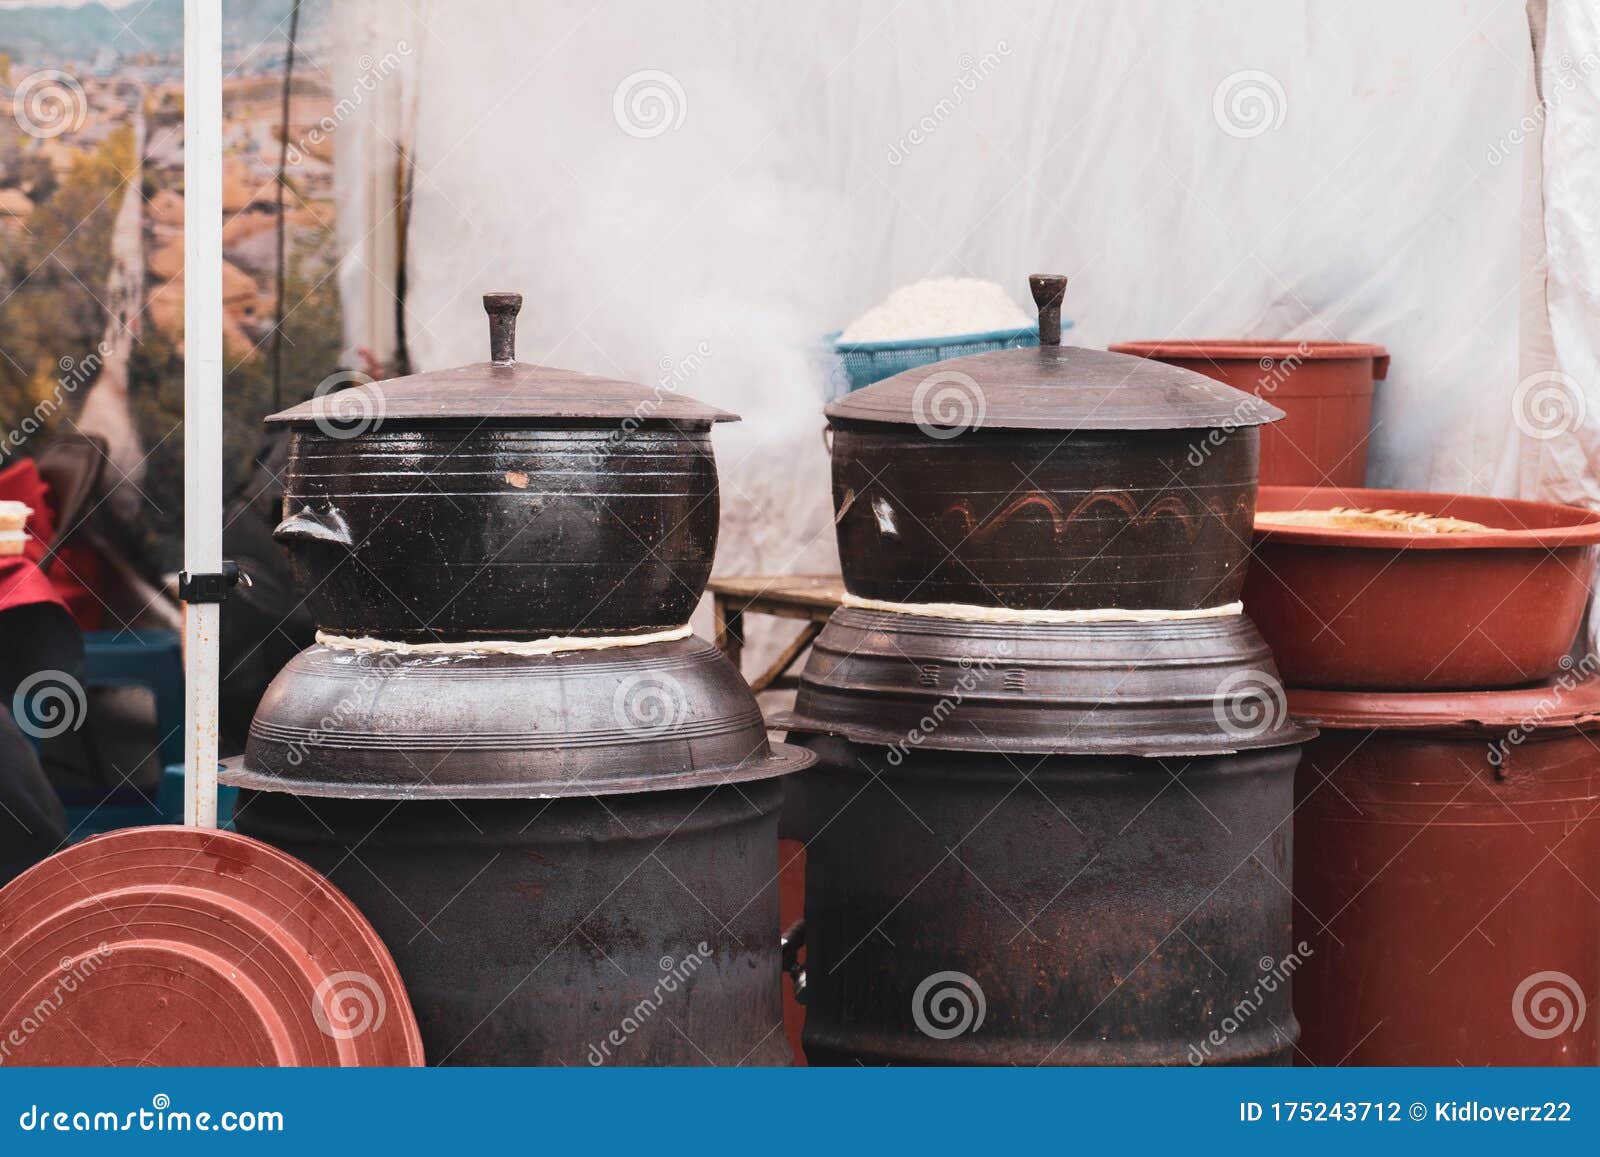 https://thumbs.dreamstime.com/z/large-korean-traditional-ceramic-rice-cooker-smoke-coming-out-style-stone-pot-175243712.jpg